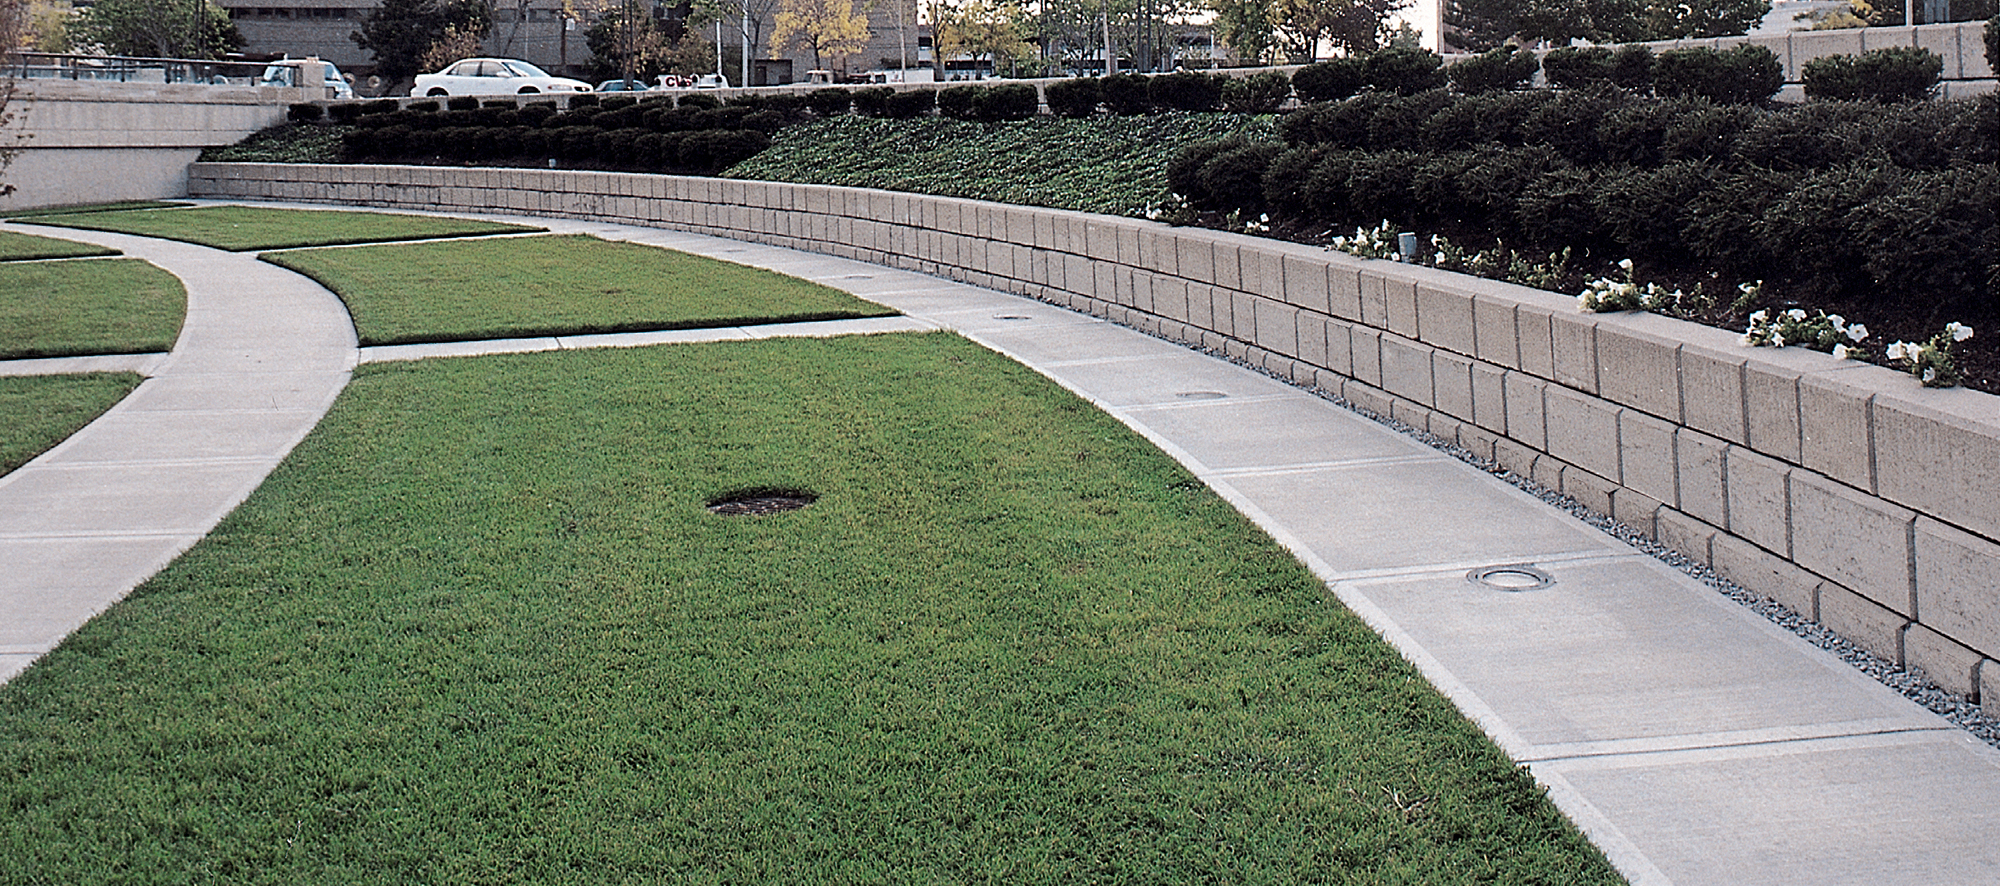 A DuraHold2 retaining wall gently curves, running parallel with the concrete pathway and green patches while containing its own softscaping.